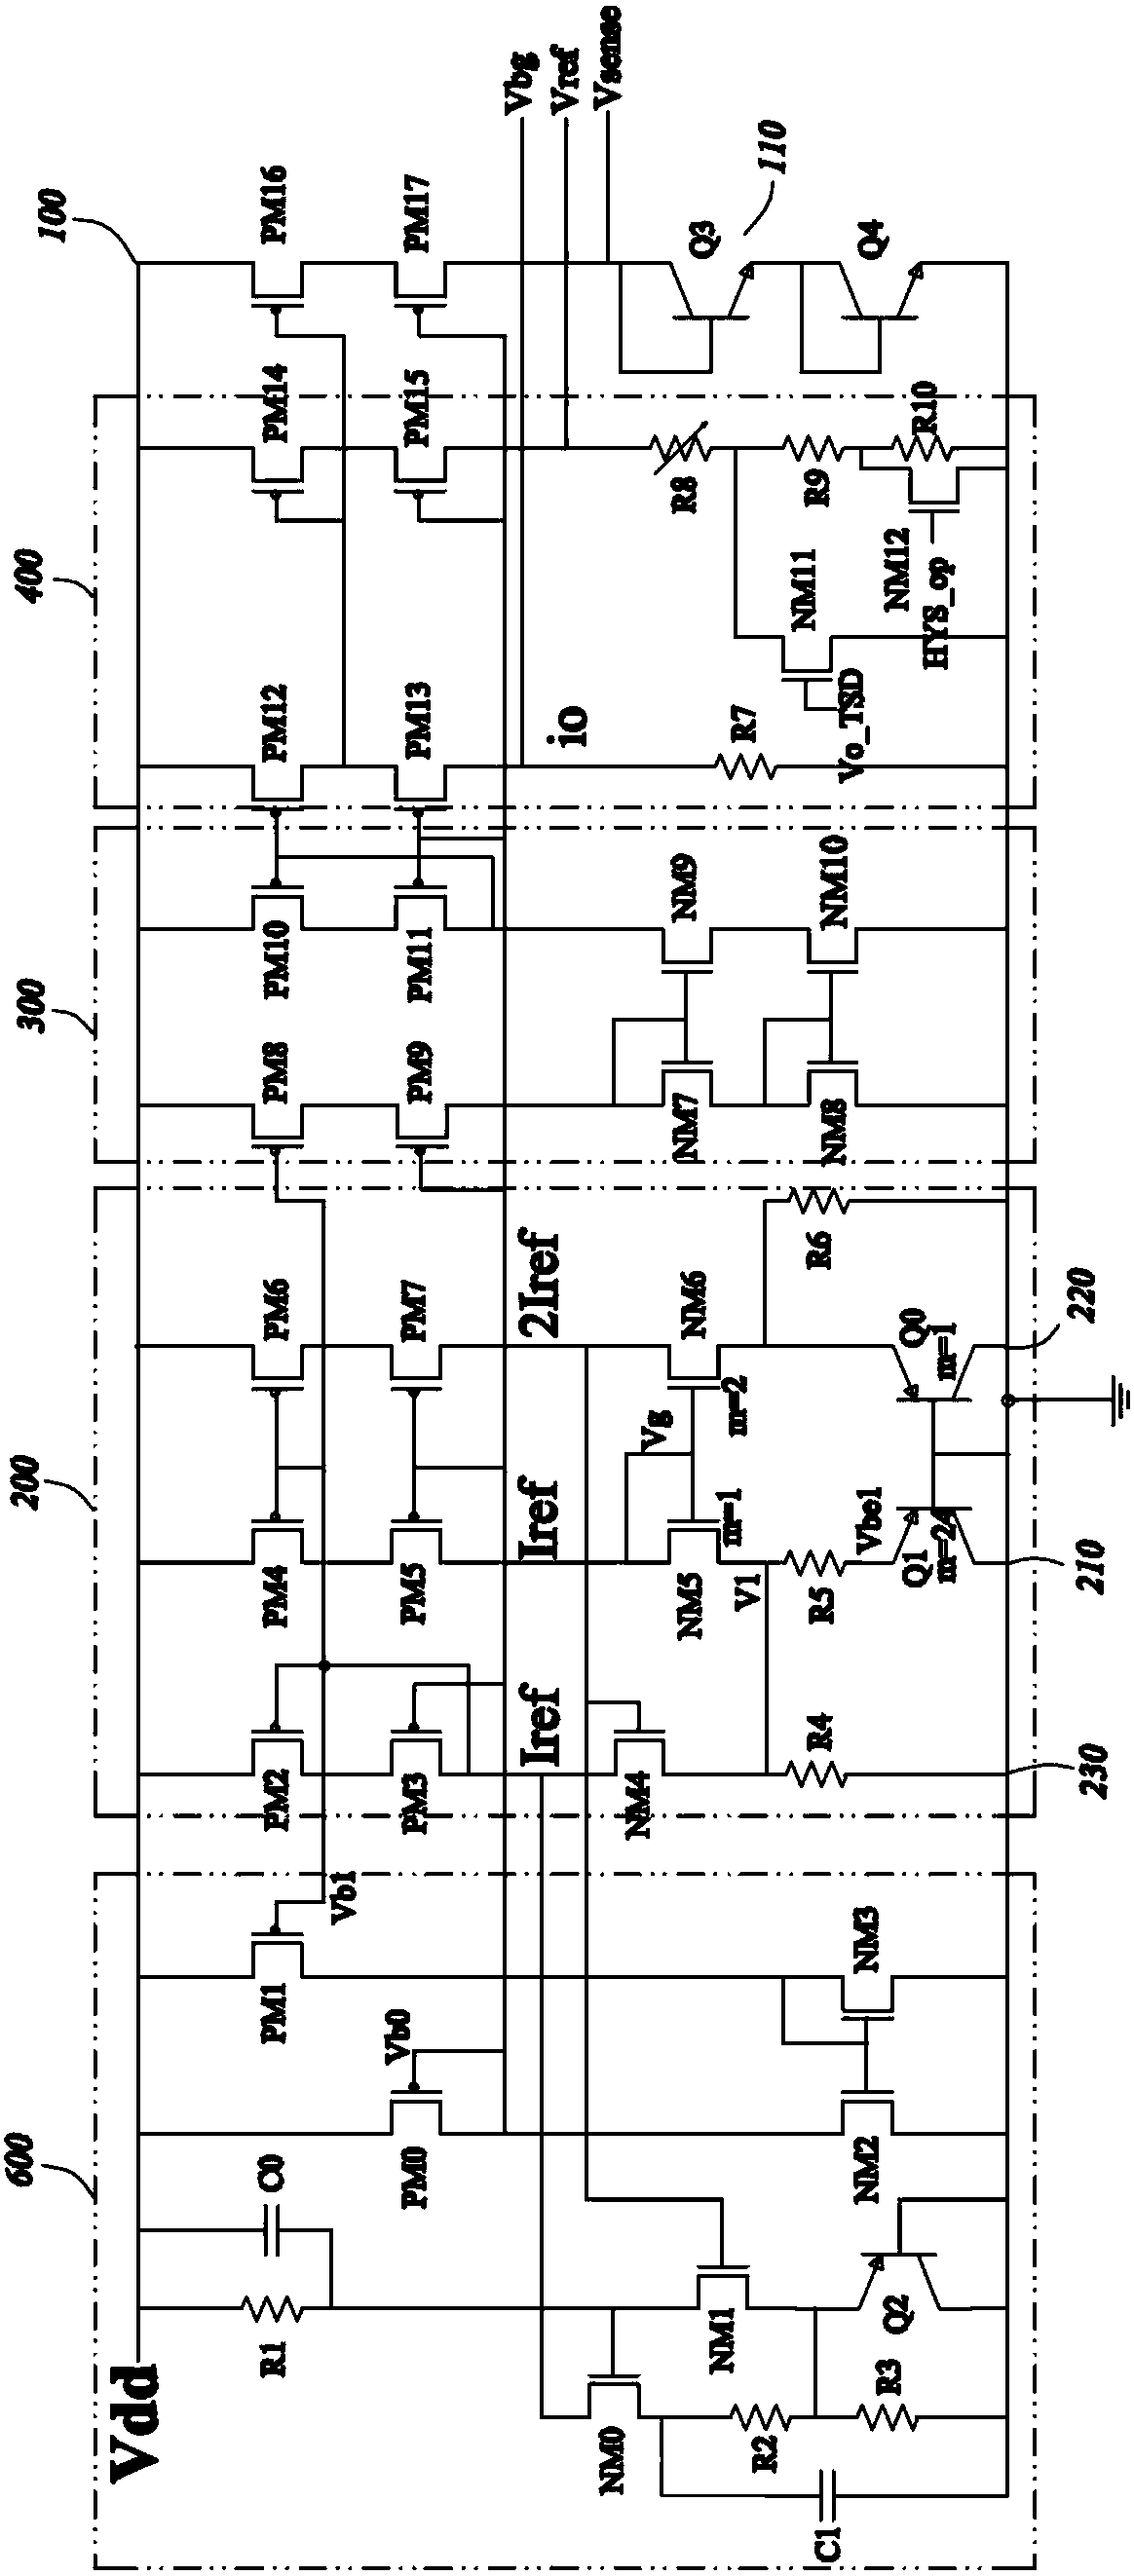 Temperature detecting circuit and implanted medical device using the same